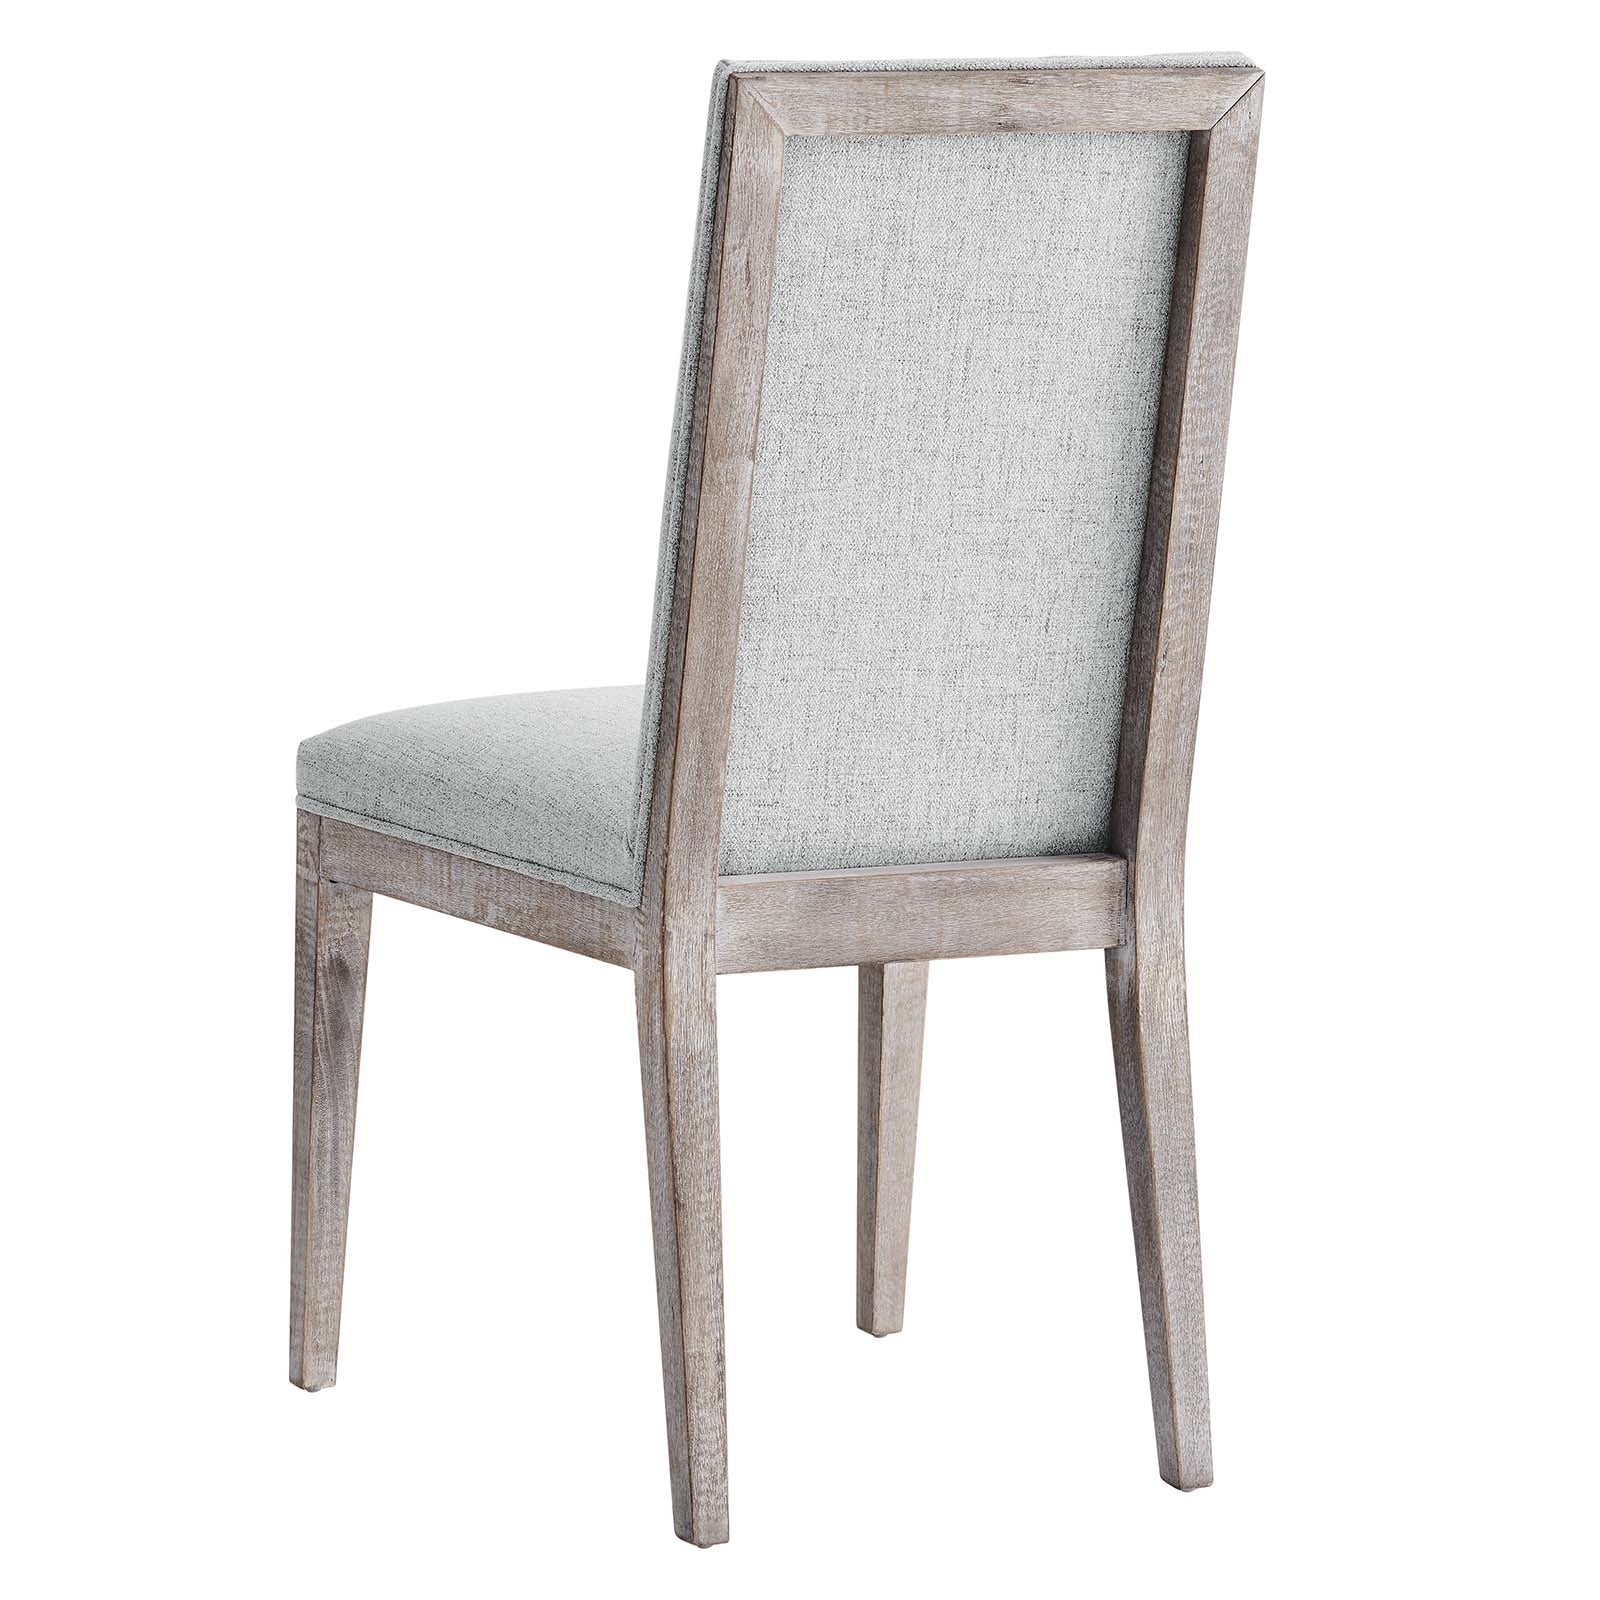 Maisonette French Vintage Tufted Fabric Dining Side Chairs Set of 2 - East Shore Modern Home Furnishings